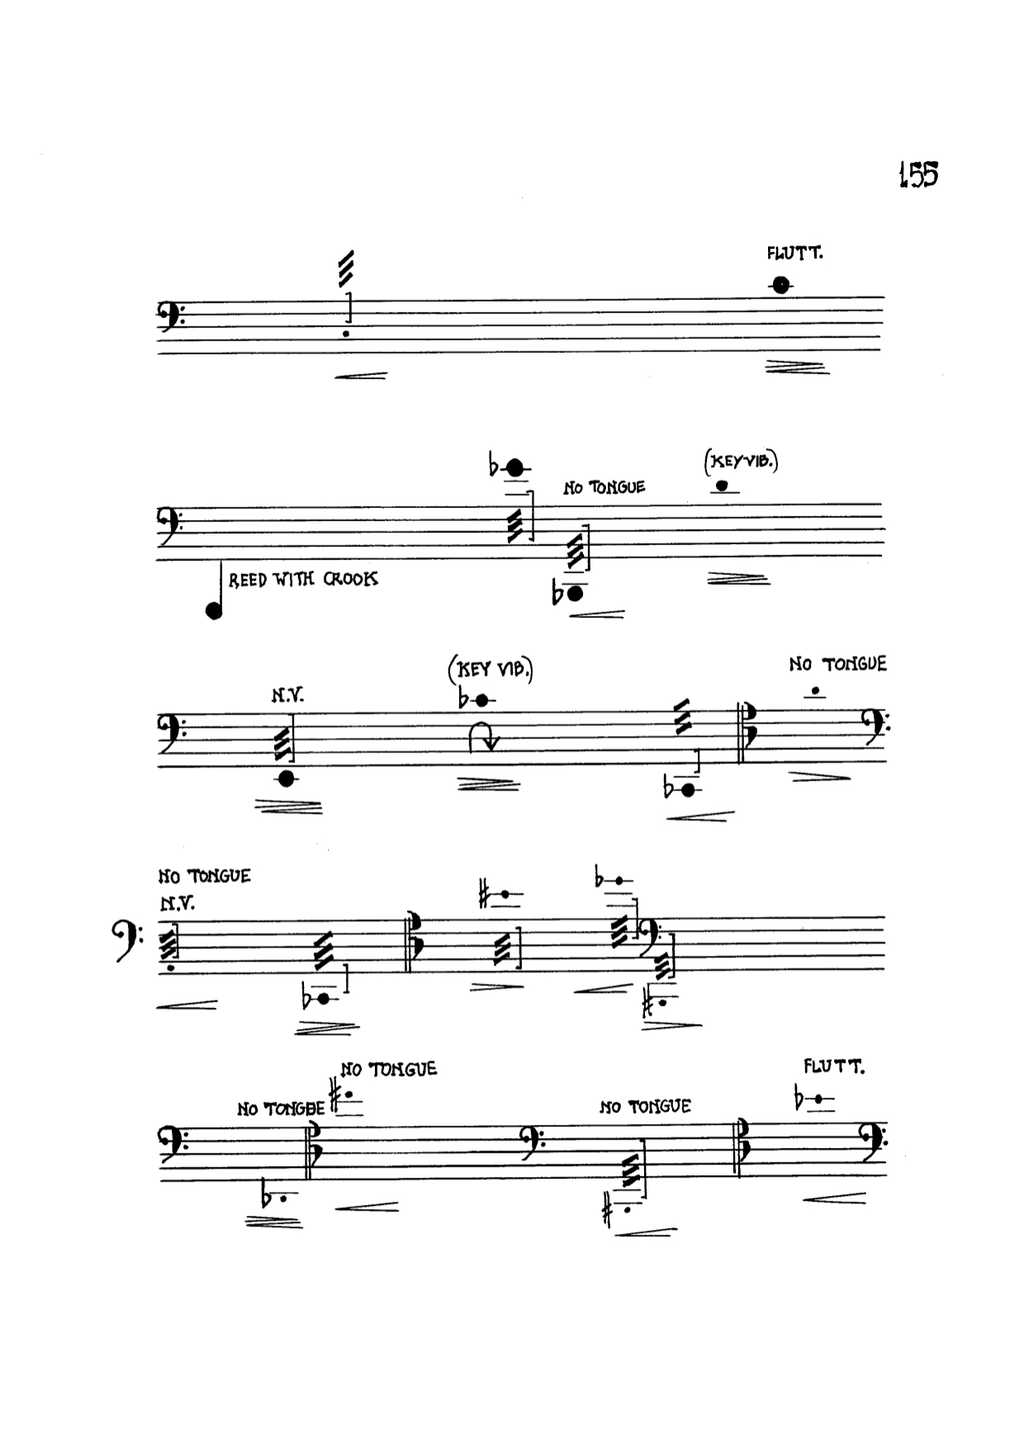 John Cage, Solo for Solo for Bassoon and Baryton Saxophone, p. 155